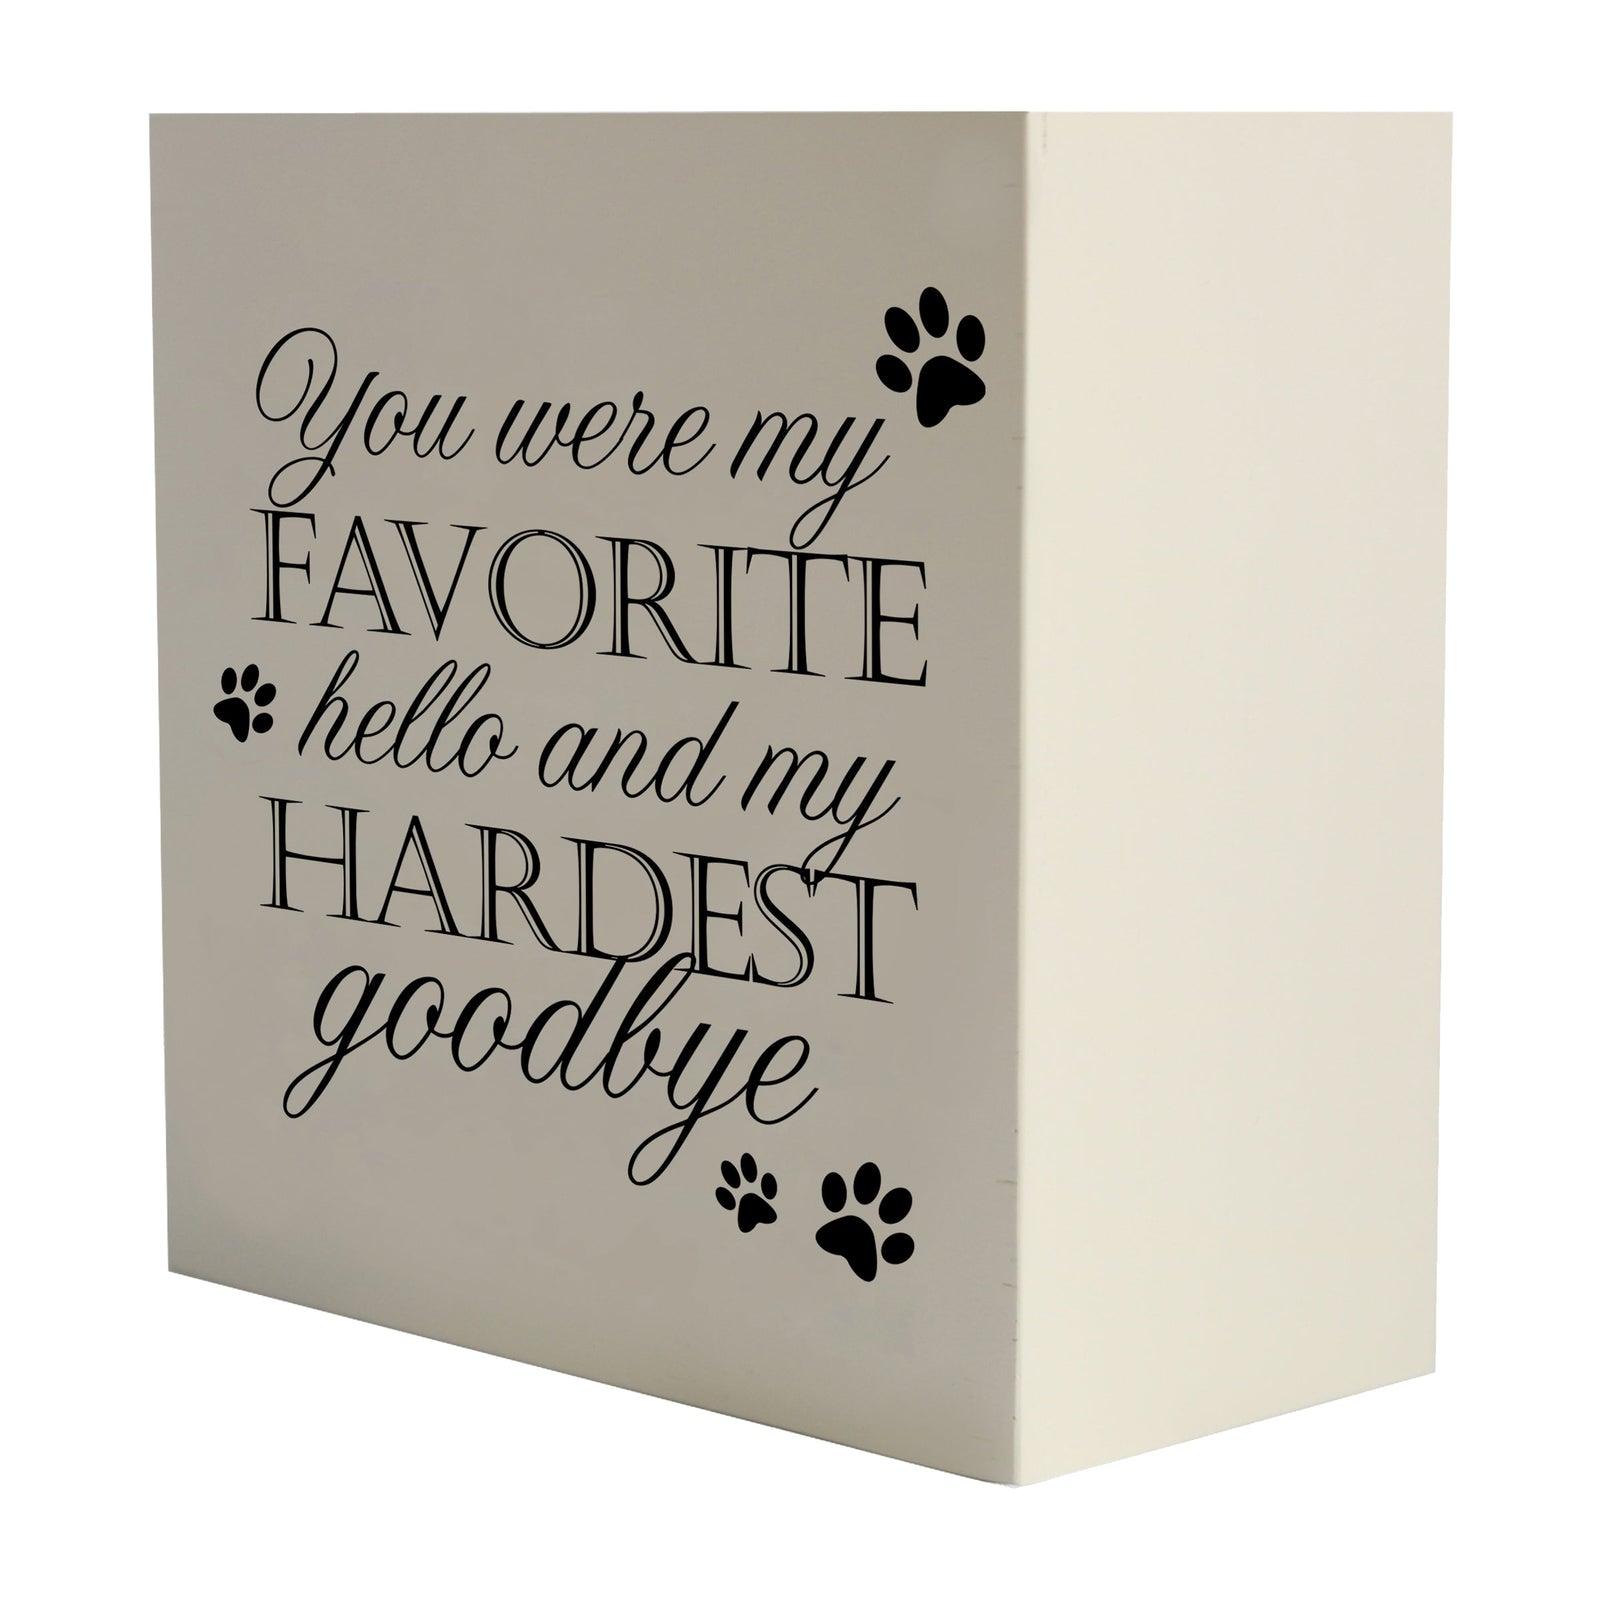 Pet Memorial Shadow Box Cremation Urn for Dog or Cat - You Were My Favorite Hello